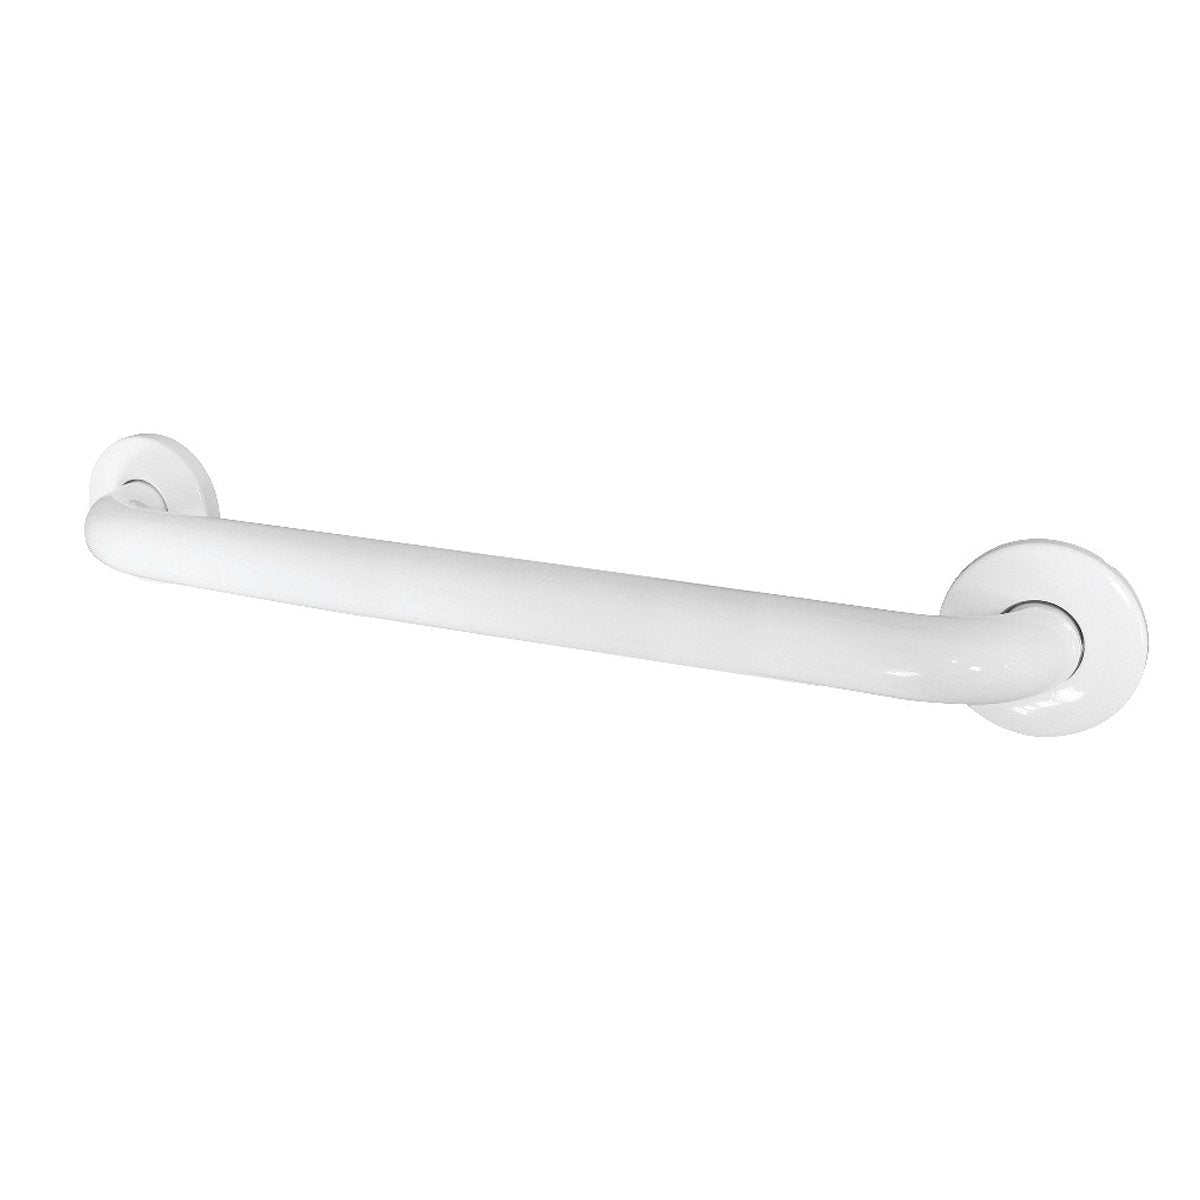 Kingston Brass Made To Match 24-Inch Stainless Steel Grab Bar in White